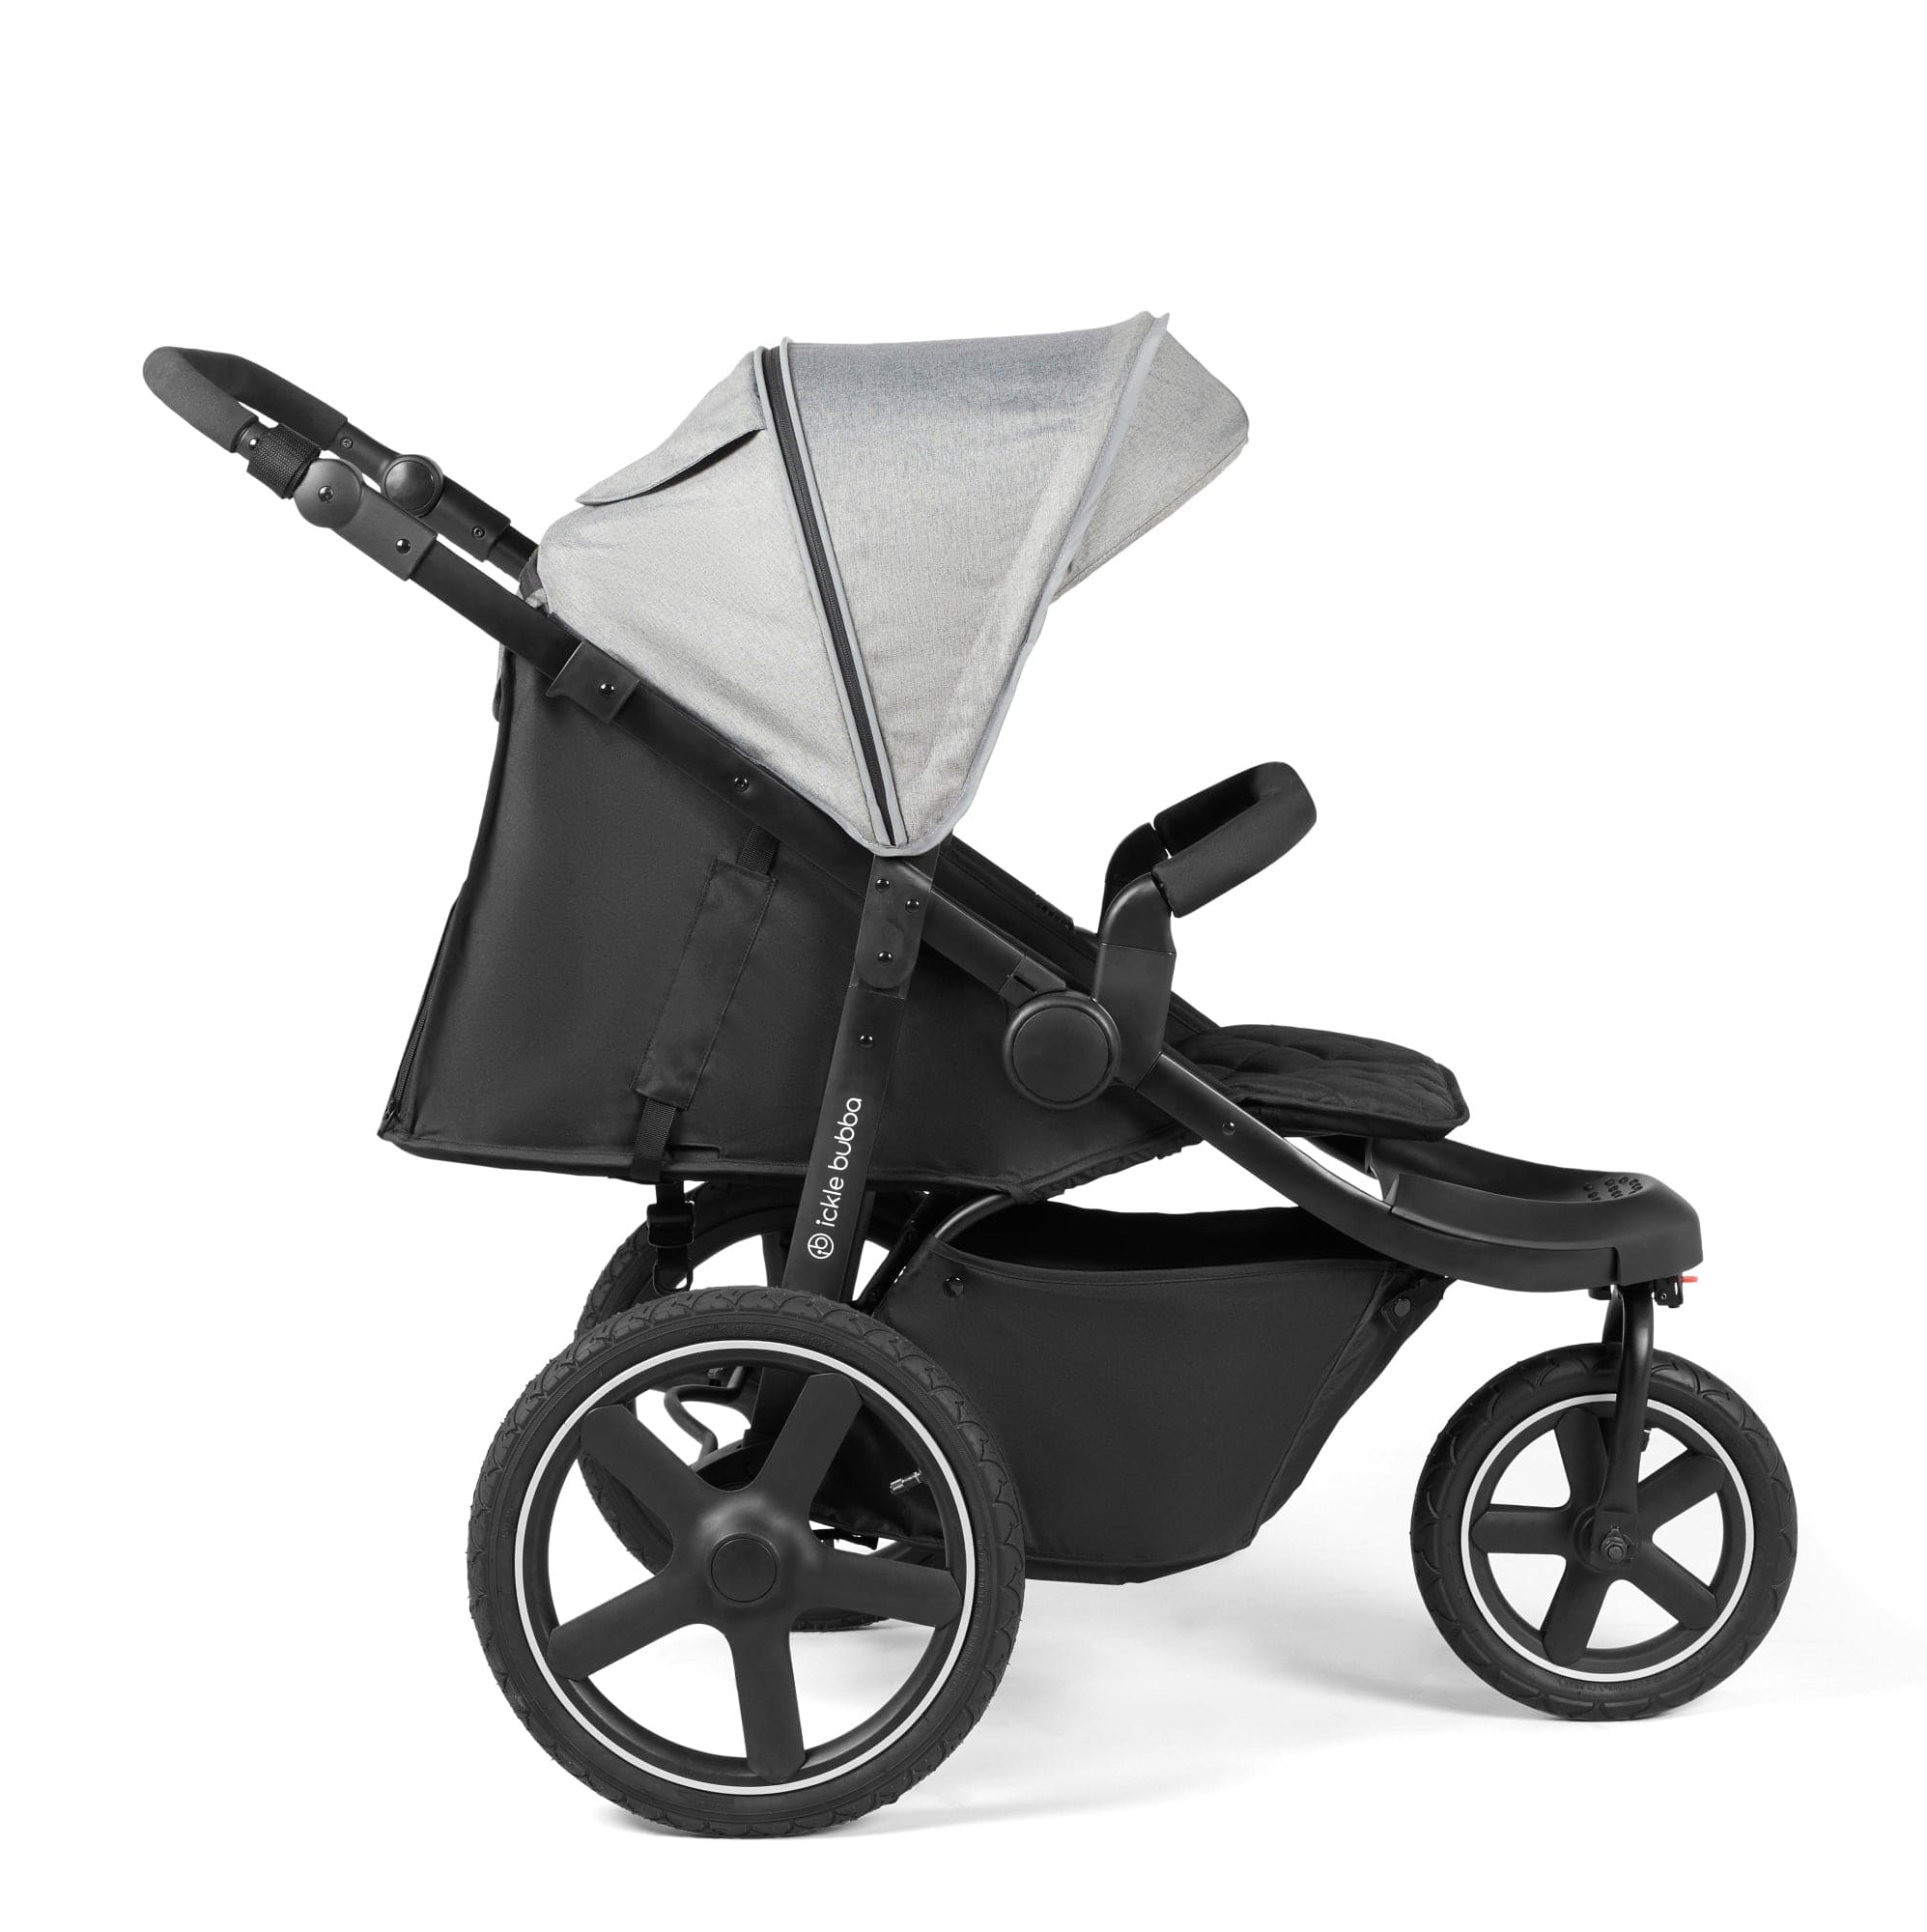 Ickle Bubba Venus Prime Jogger Stroller I-Size Travel System in Black/Space Grey with Base 3 Wheelers